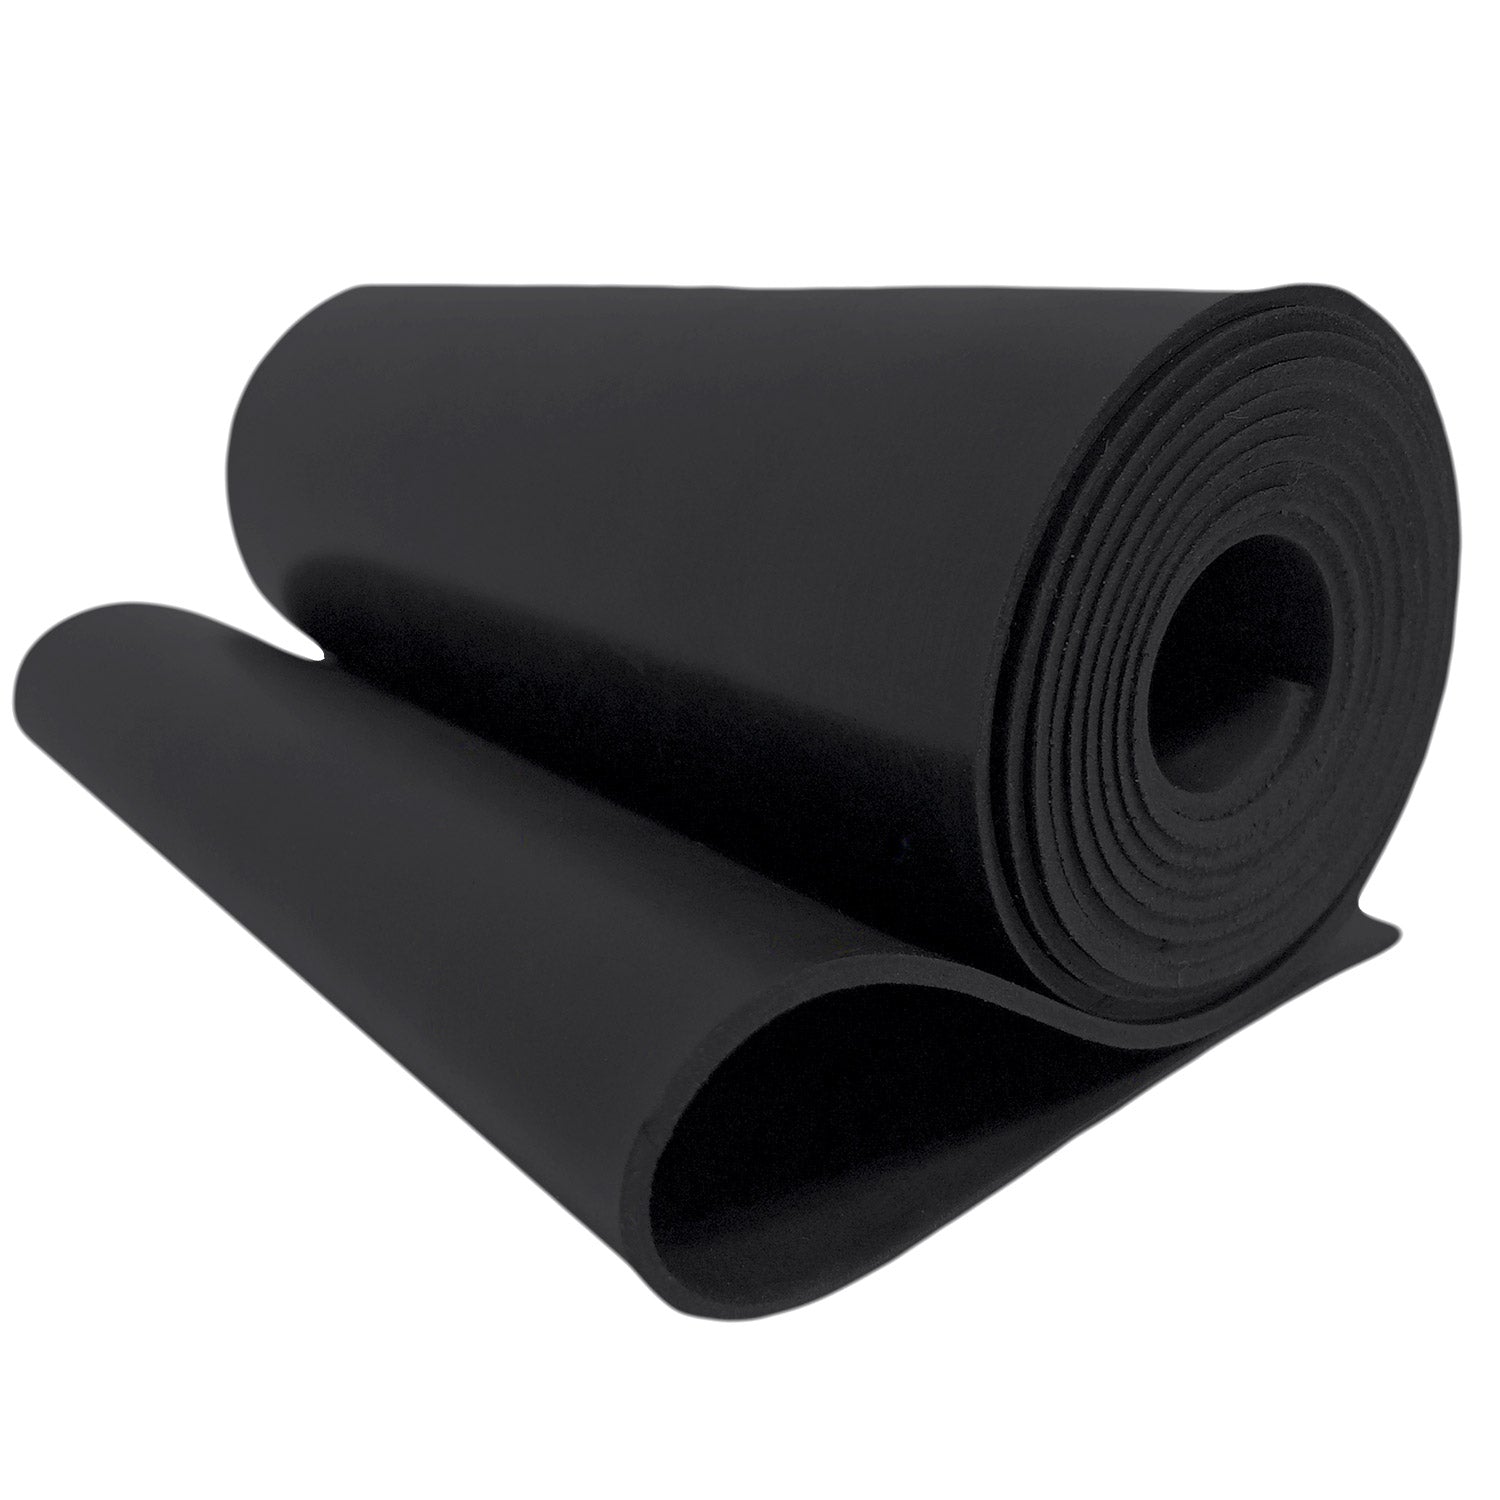 RubberMAX® High Strength Masticated Rubber Roll - 1/4 x 52 x 300